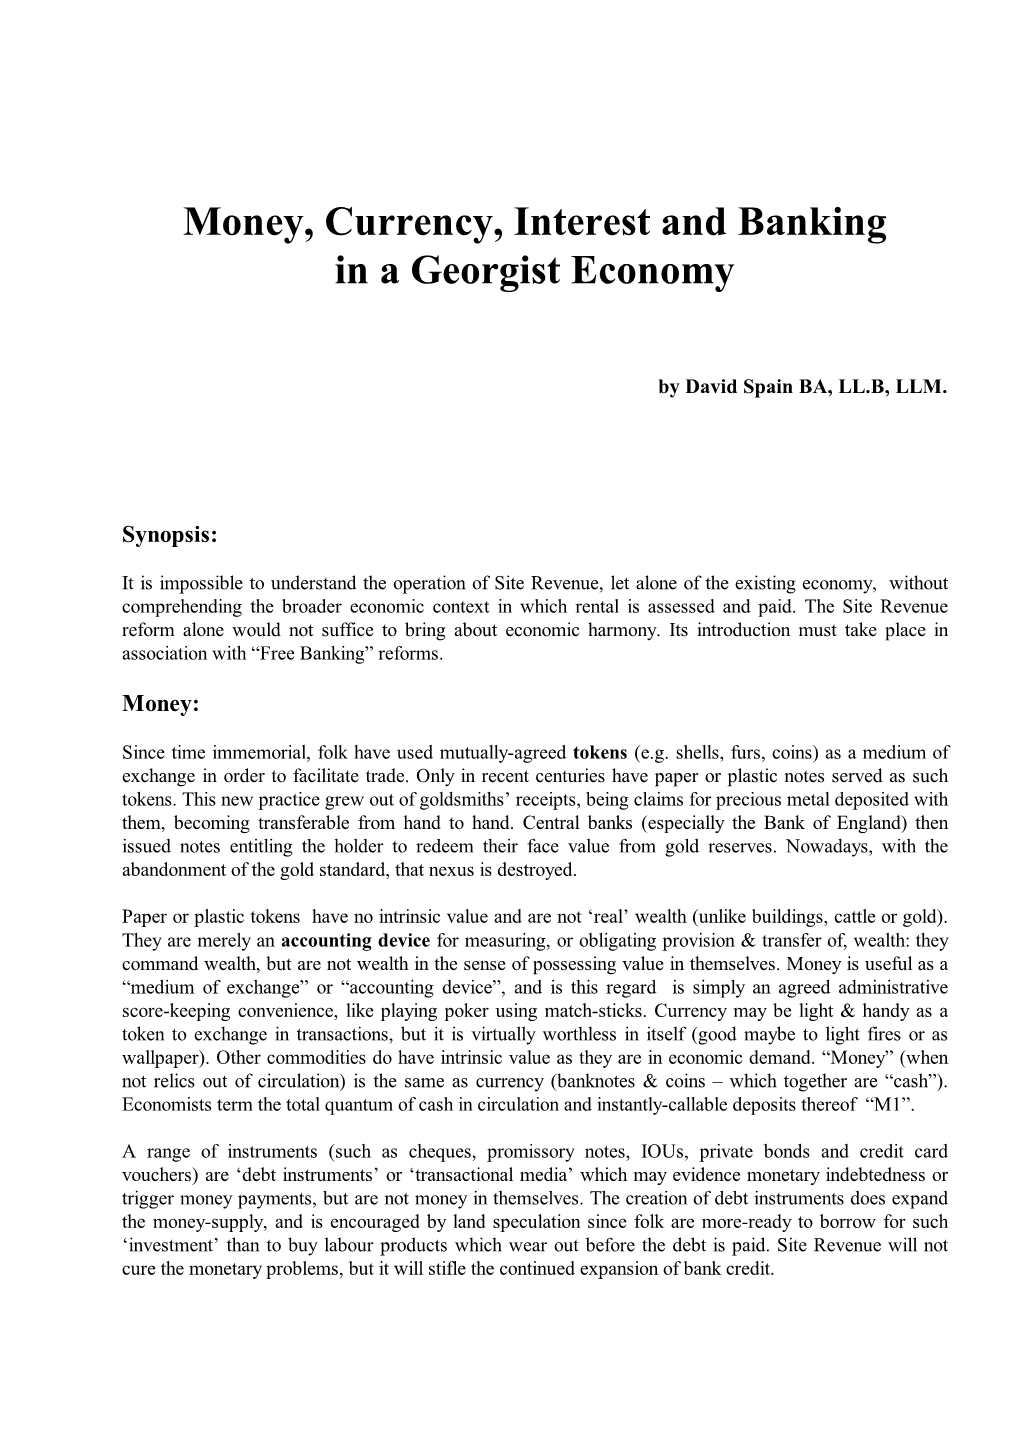 Money, Currency, Interest and Banking in a Georgist Economy